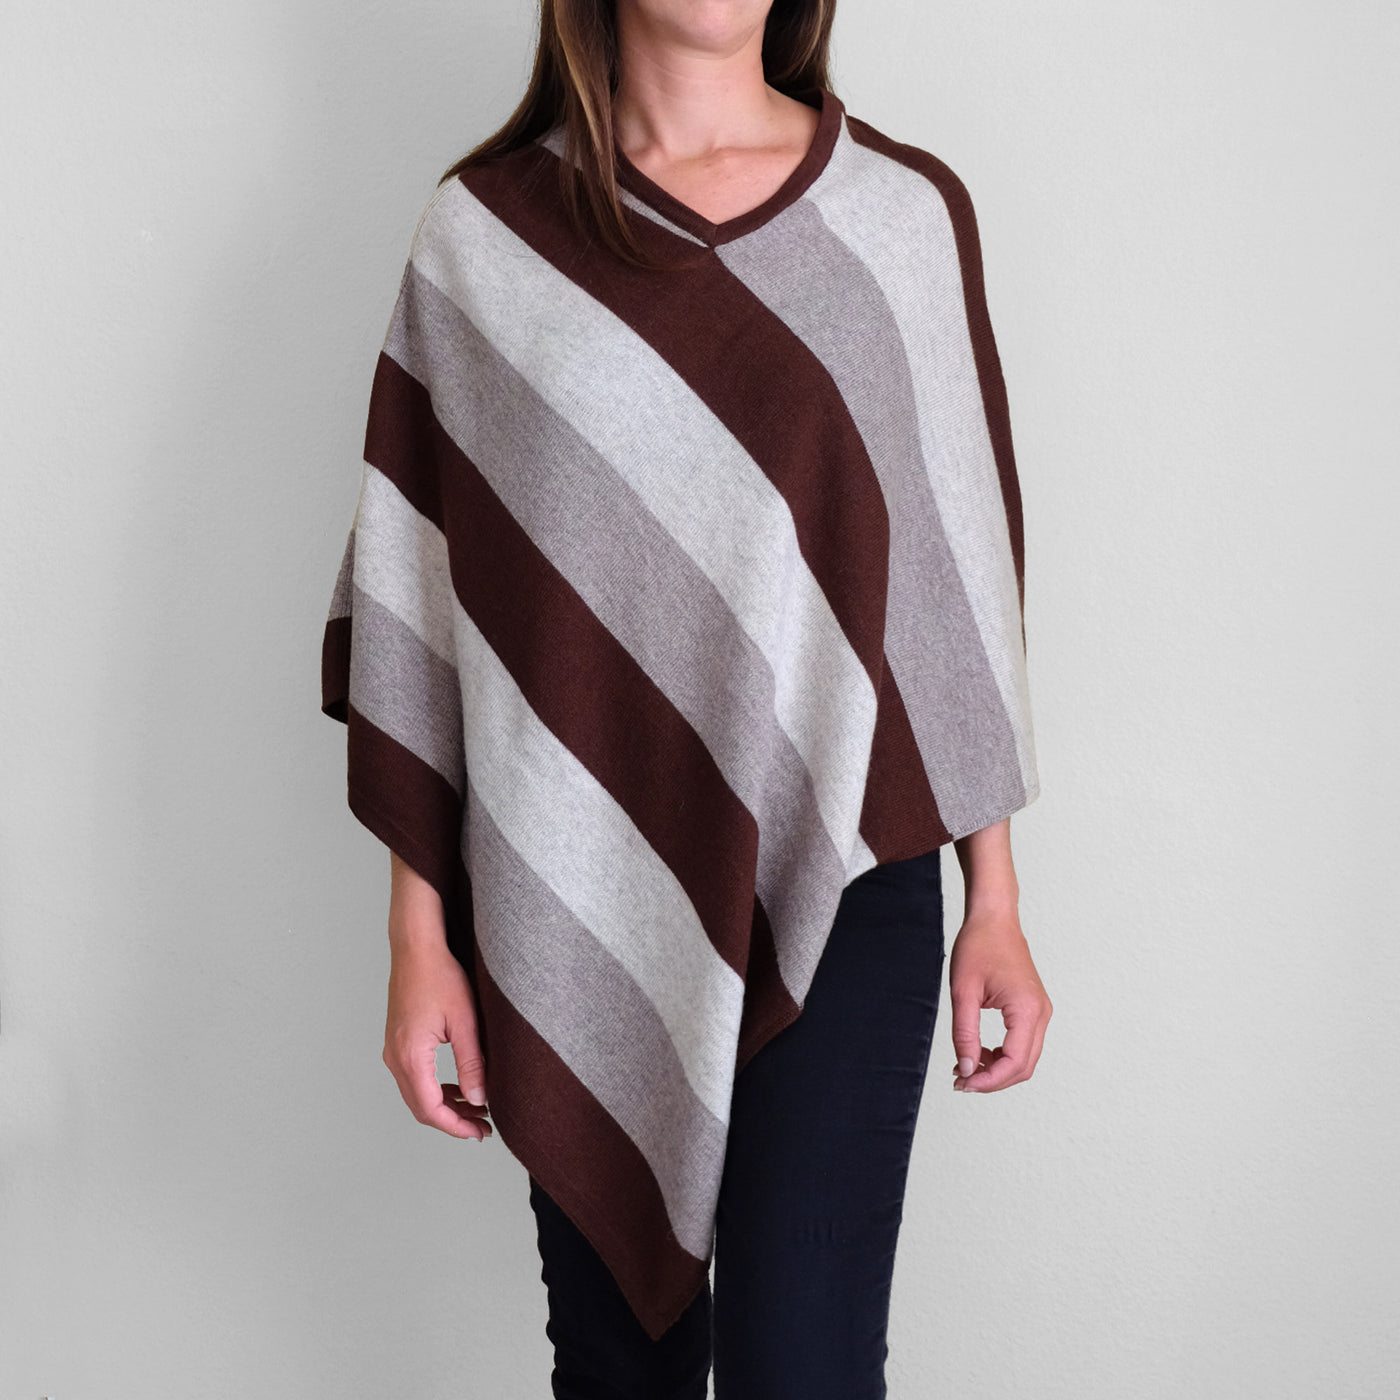 Woman wearing white gray and brown striped poncho